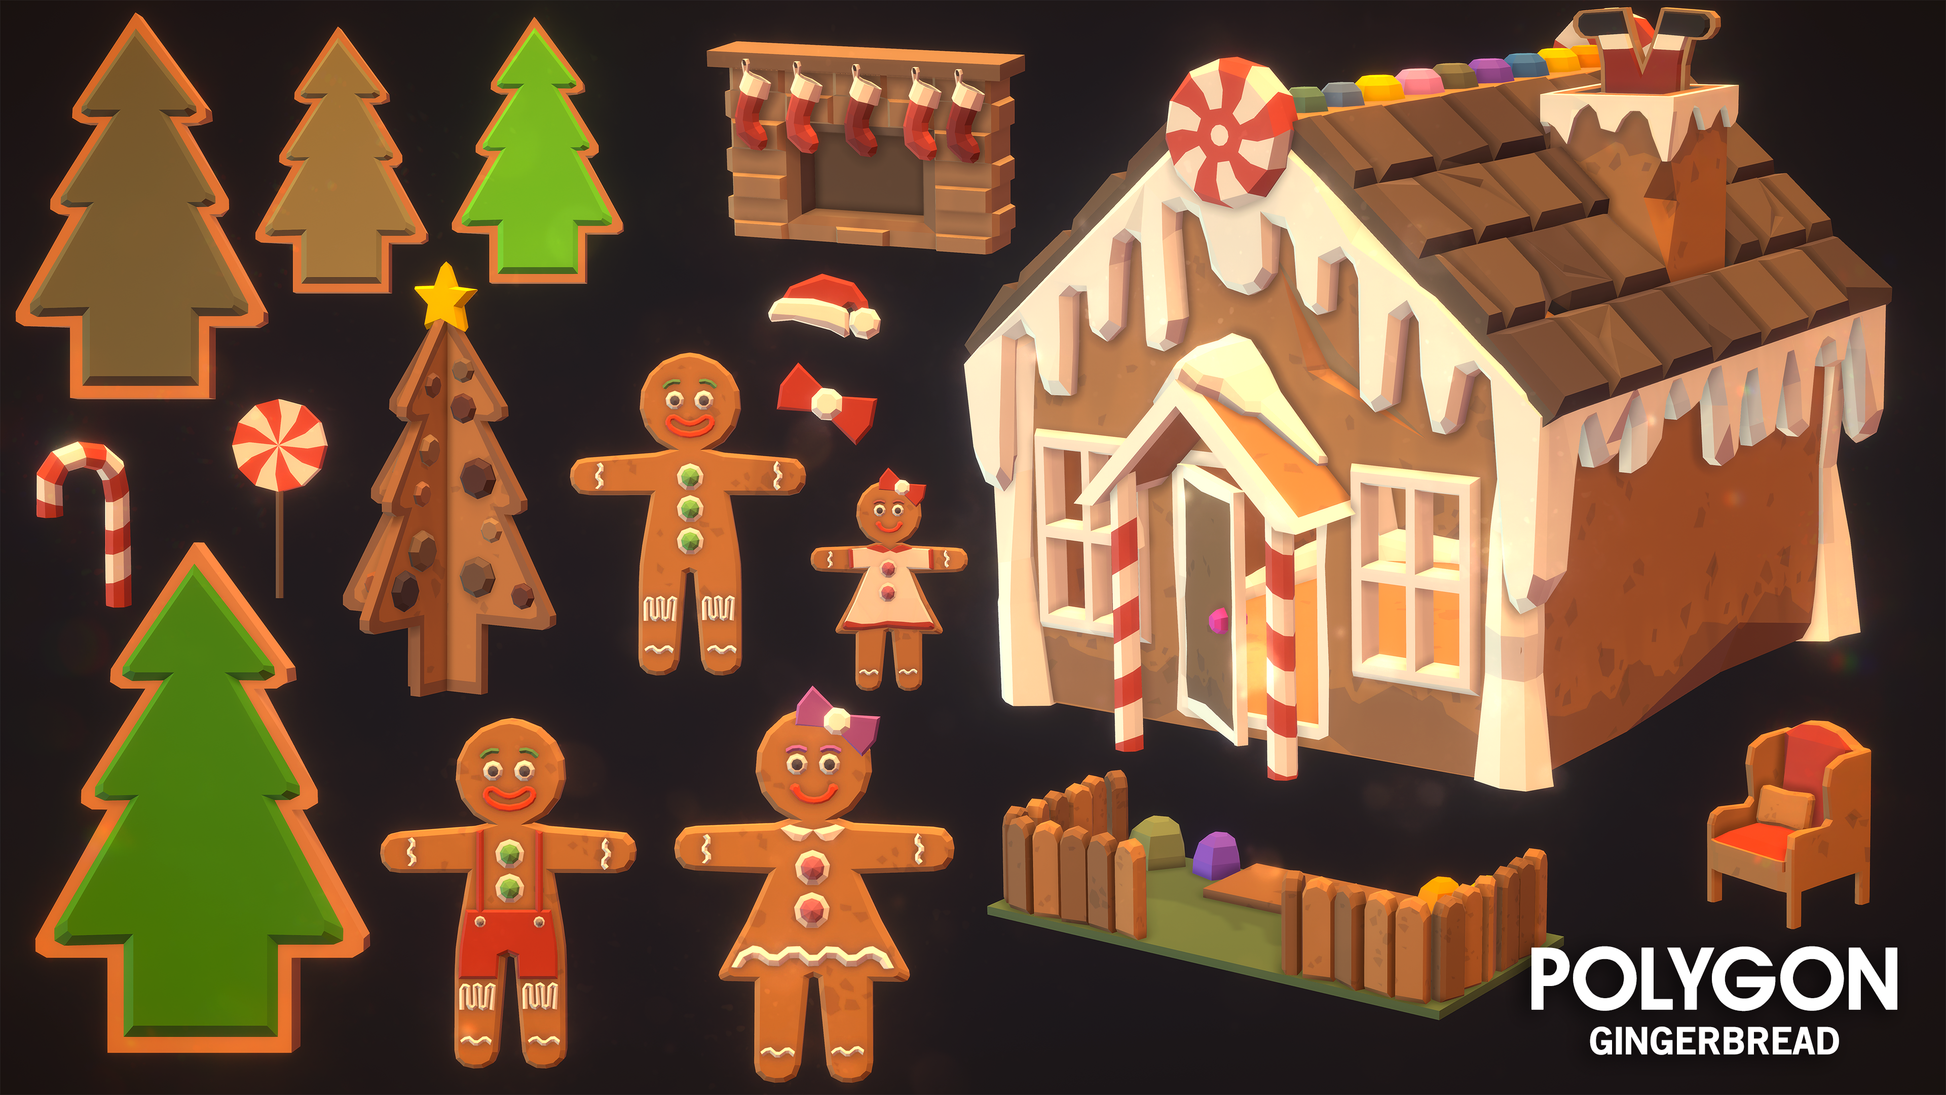 POLYGON Gingerbread icons - assets included in the pack. gingerbread men, house, trees, fence, fireplace.